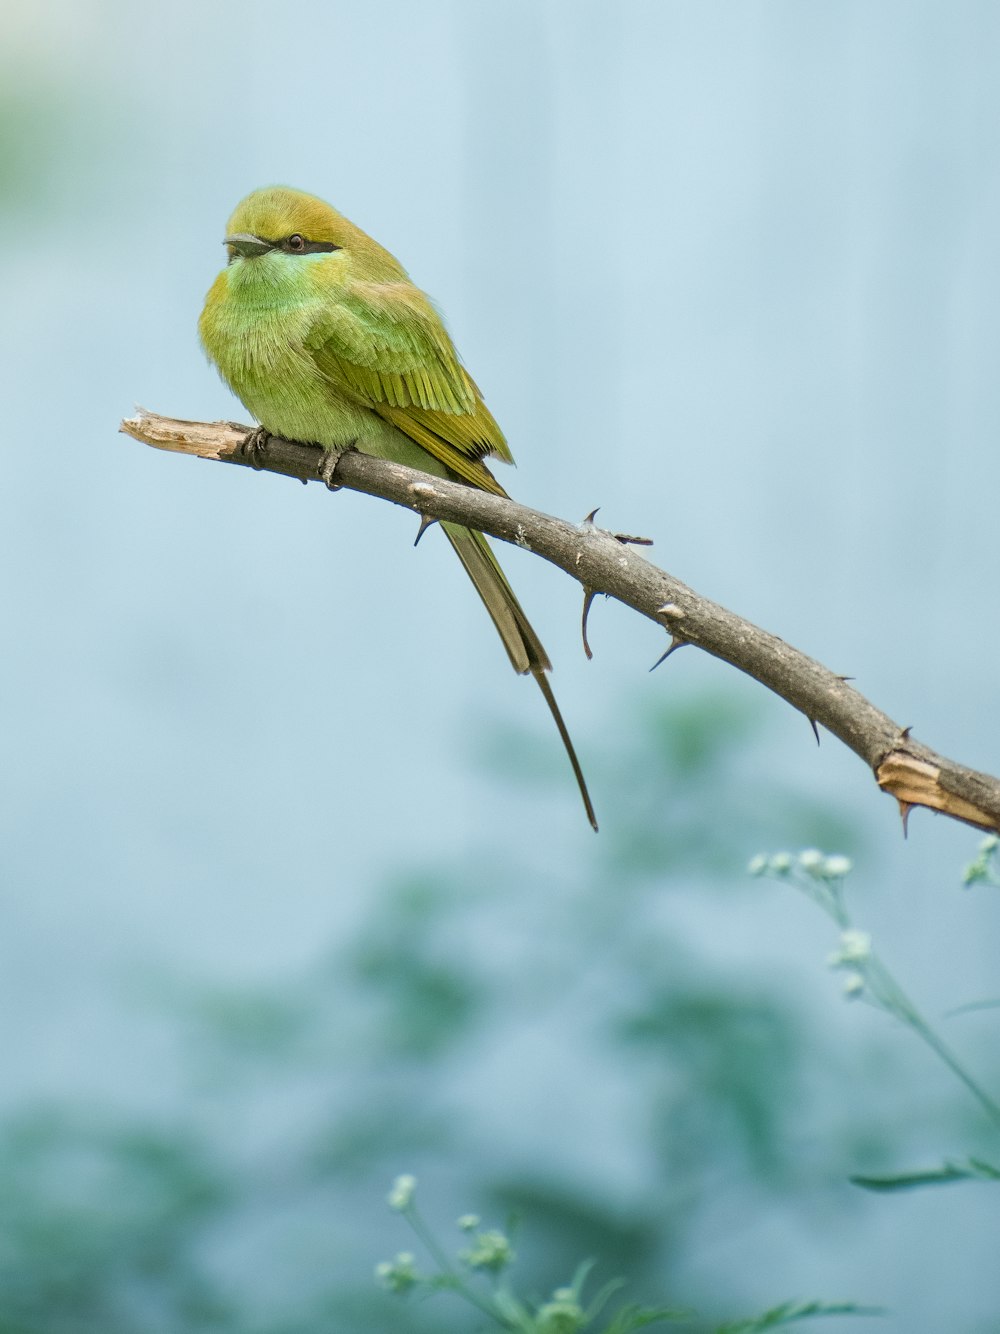 a small green bird sitting on a branch